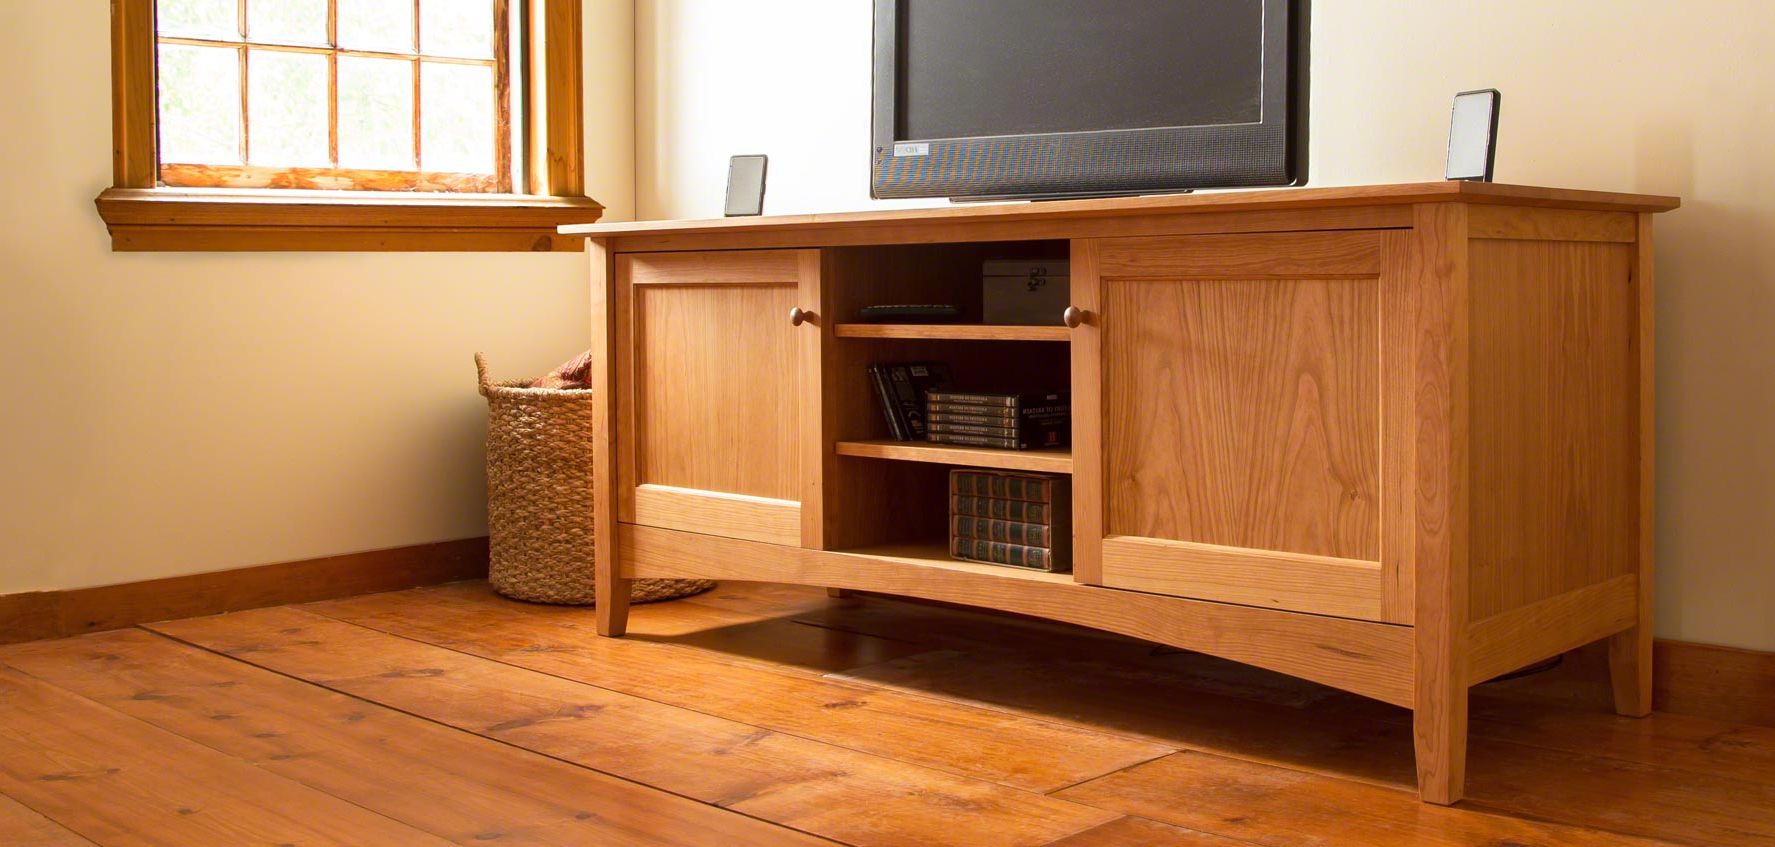 Handcrafted Wood Tv Stands & Media Consoles – Vermont Woods Studios Inside Newest Maple Tv Cabinets (View 5 of 20)